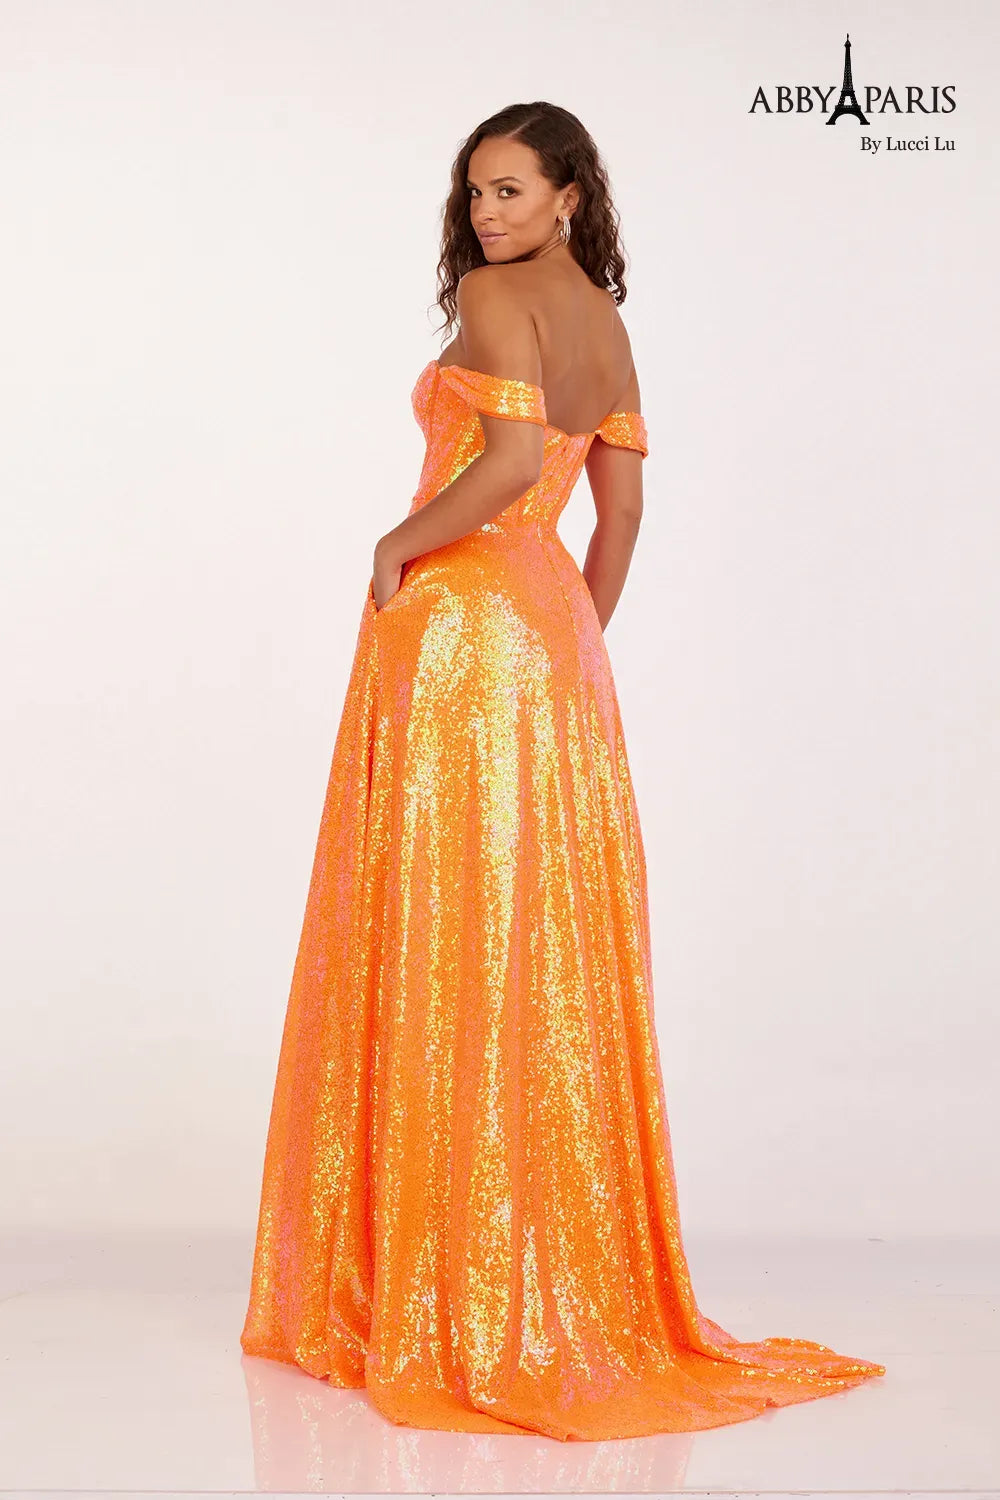 This Abby Paris Prom Dress features a timeless off-the-shoulder design with a flattering corset bodice. The dress is adorned with stunning sequins, adding a touch of glamour to any formal occasion. With convenient pockets, you'll have a place to store your essentials while dancing the night away. Feel confident and elegant in this stylish ballgown.&nbsp;